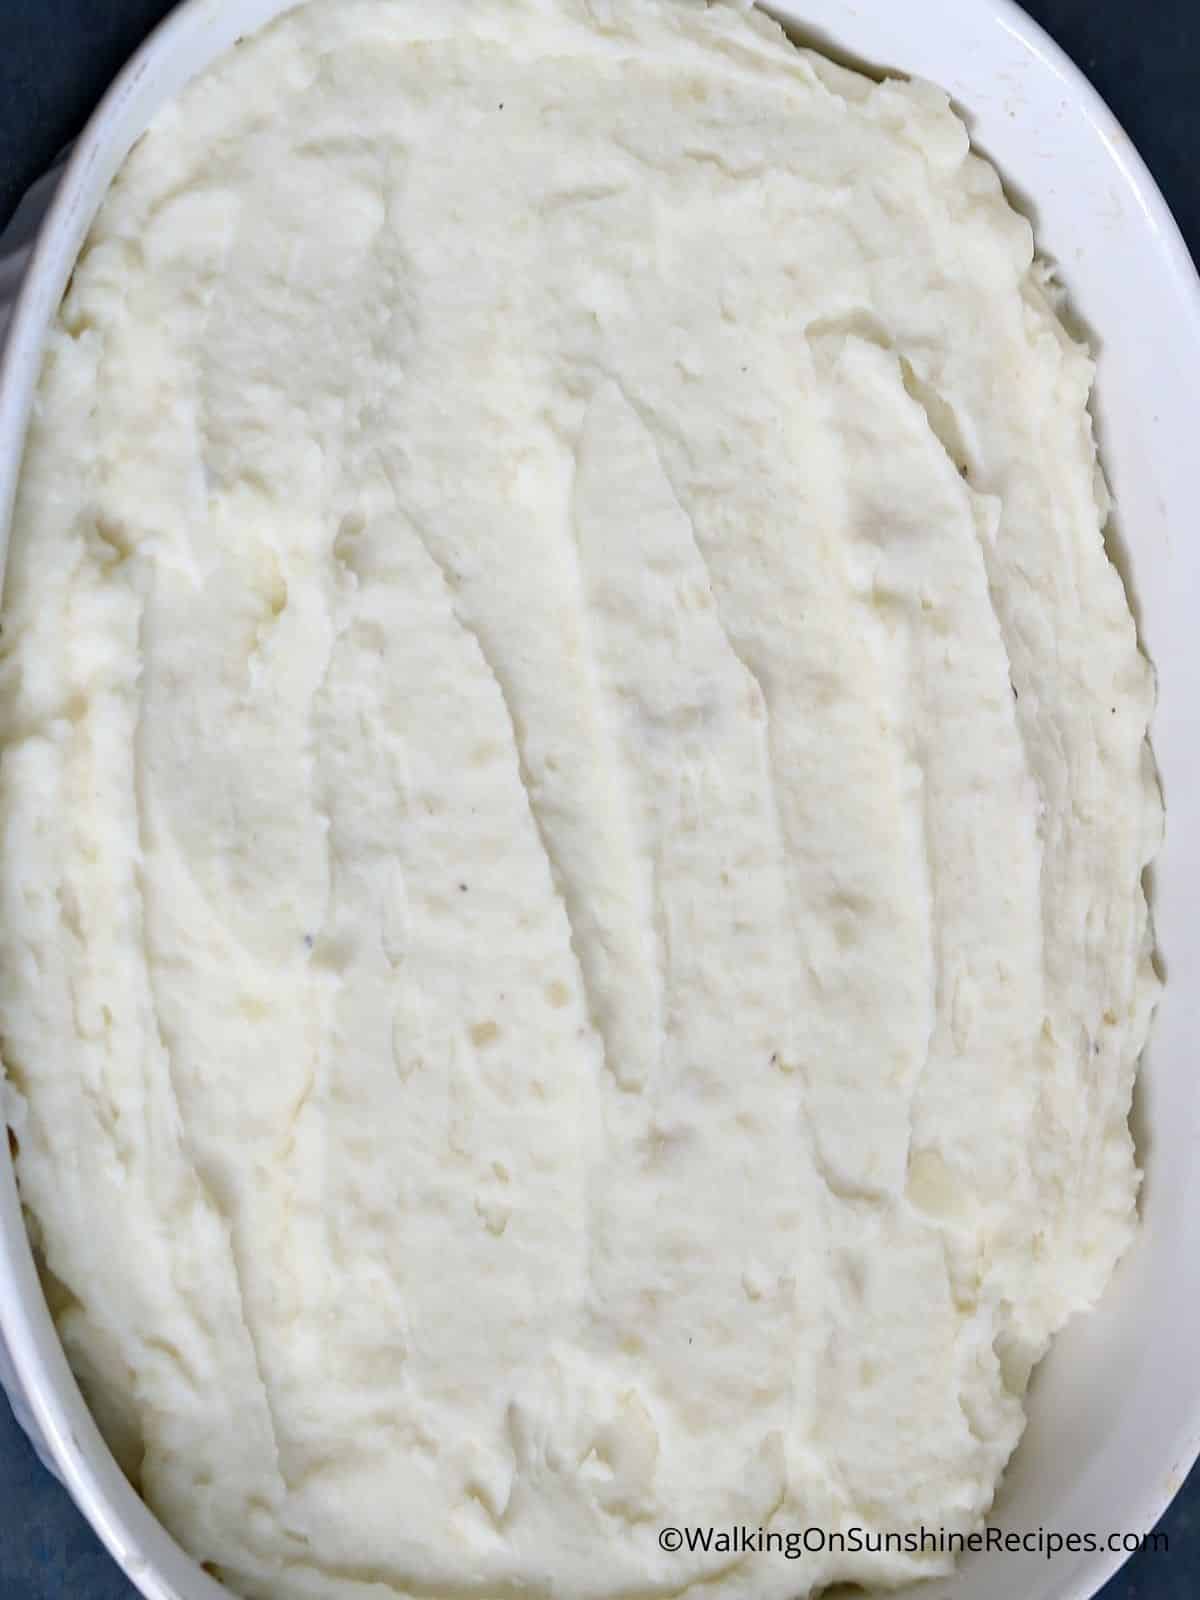 mashed potatoes in casserole dish.